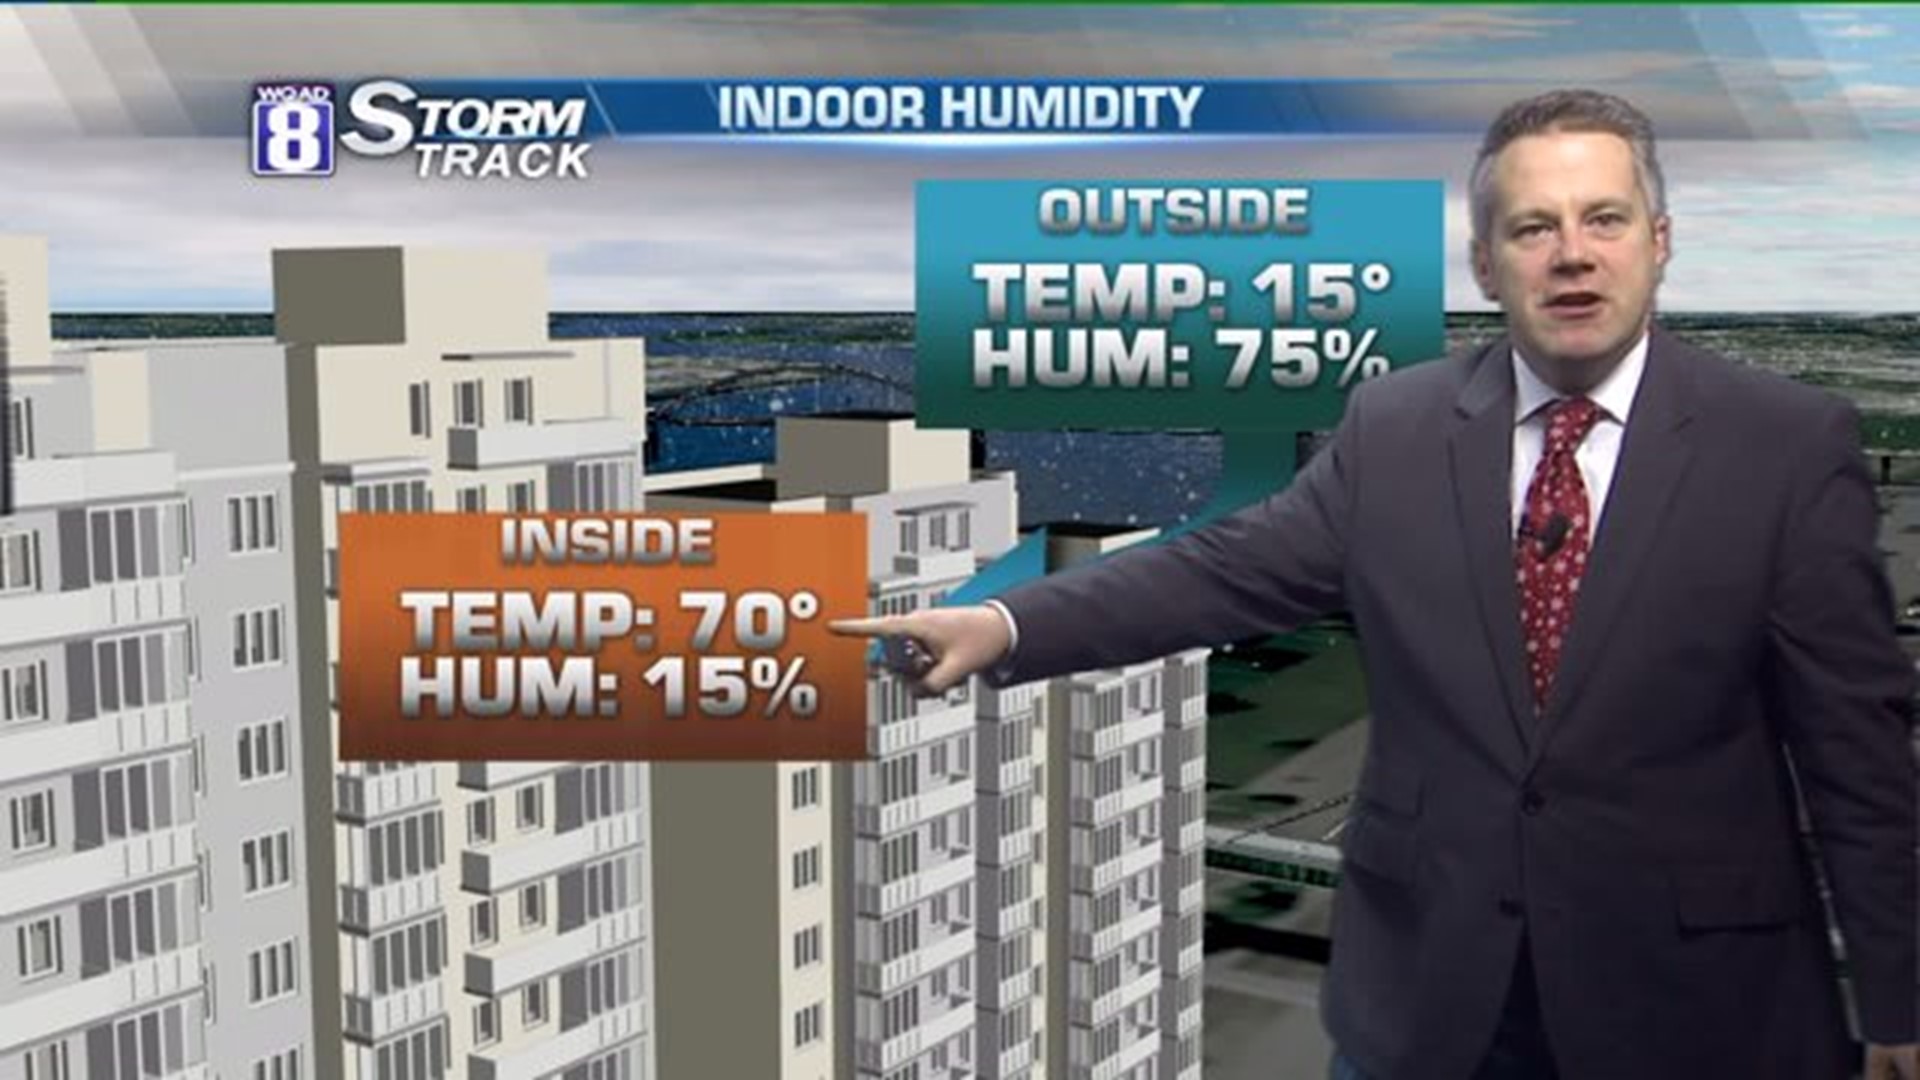 Eric shows you how to check your indoor humidity